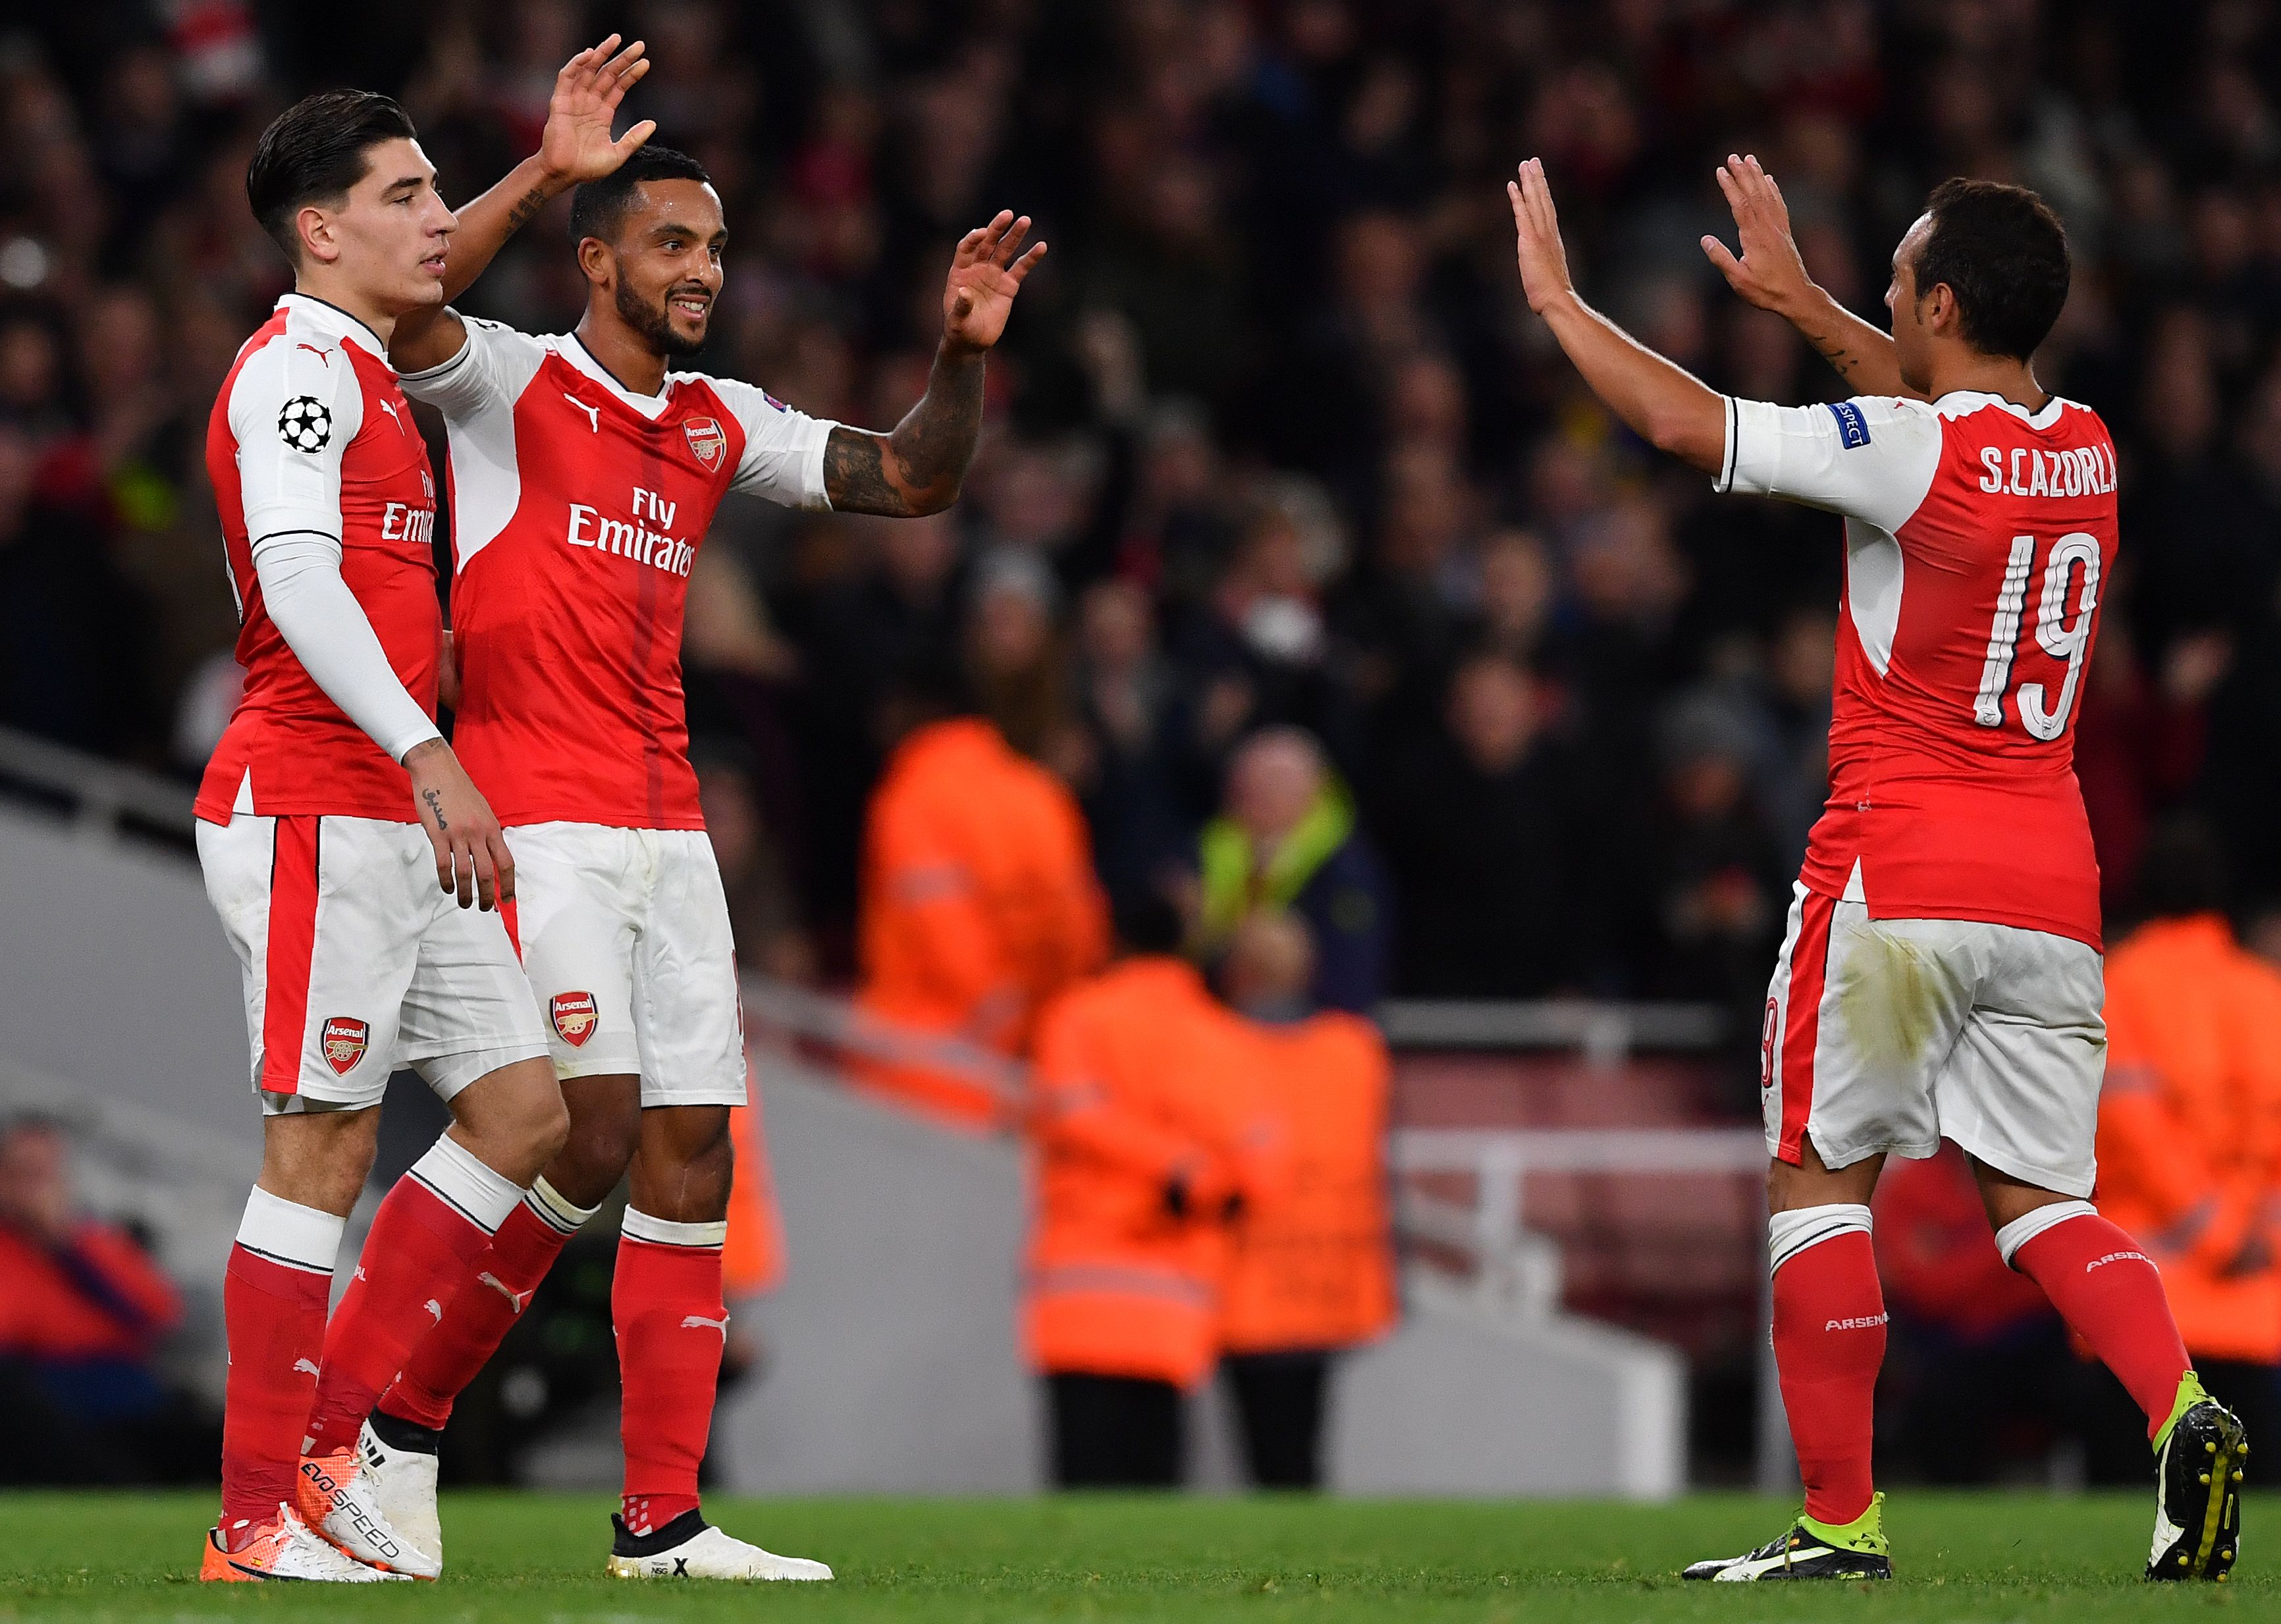 Arsenal's English midfielder Theo Walcott (C) celebrates scoring his team's second goal with Arsenal's Spanish defender Hector Bellerin (L) and Arsenal's Spanish midfielder Santi Cazorla during the UEFA Champions League Group A football match between Arsenal and Ludogorets Razgrad at The Emirates Stadium in London on October 19, 2016. / AFP / BEN STANSALL        (Photo credit should read BEN STANSALL/AFP/Getty Images)